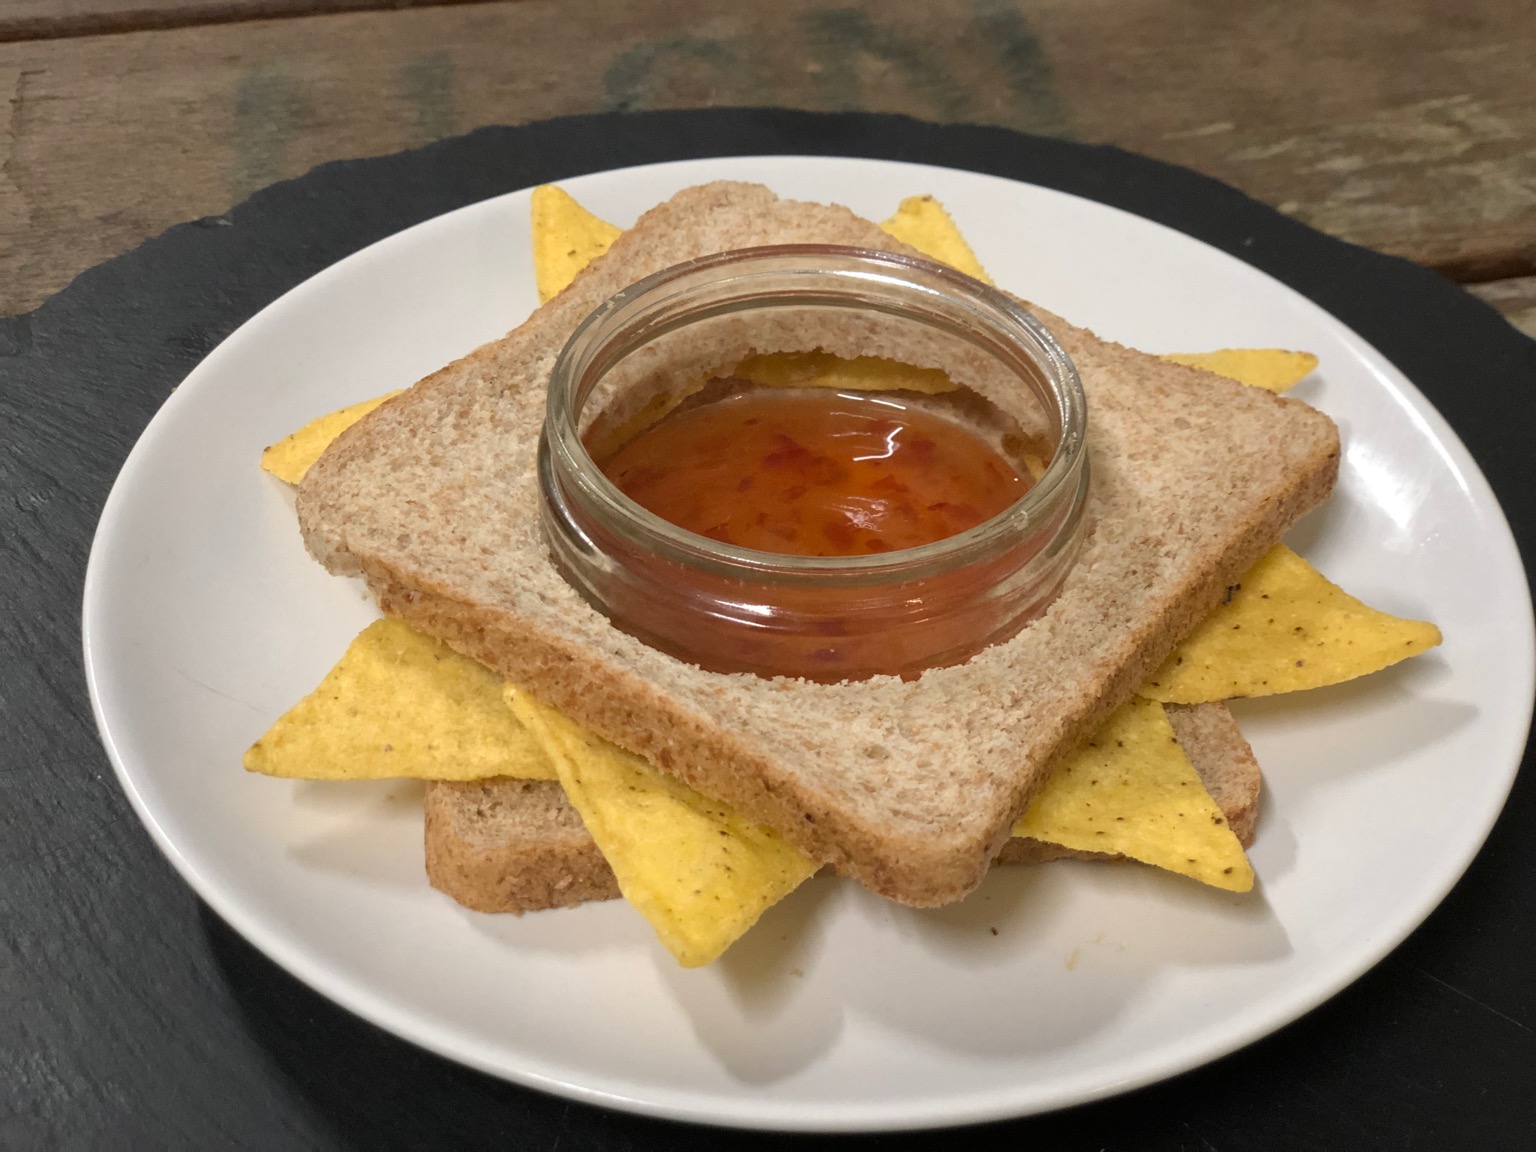 Doritos in brown bread with hole for jar of dip